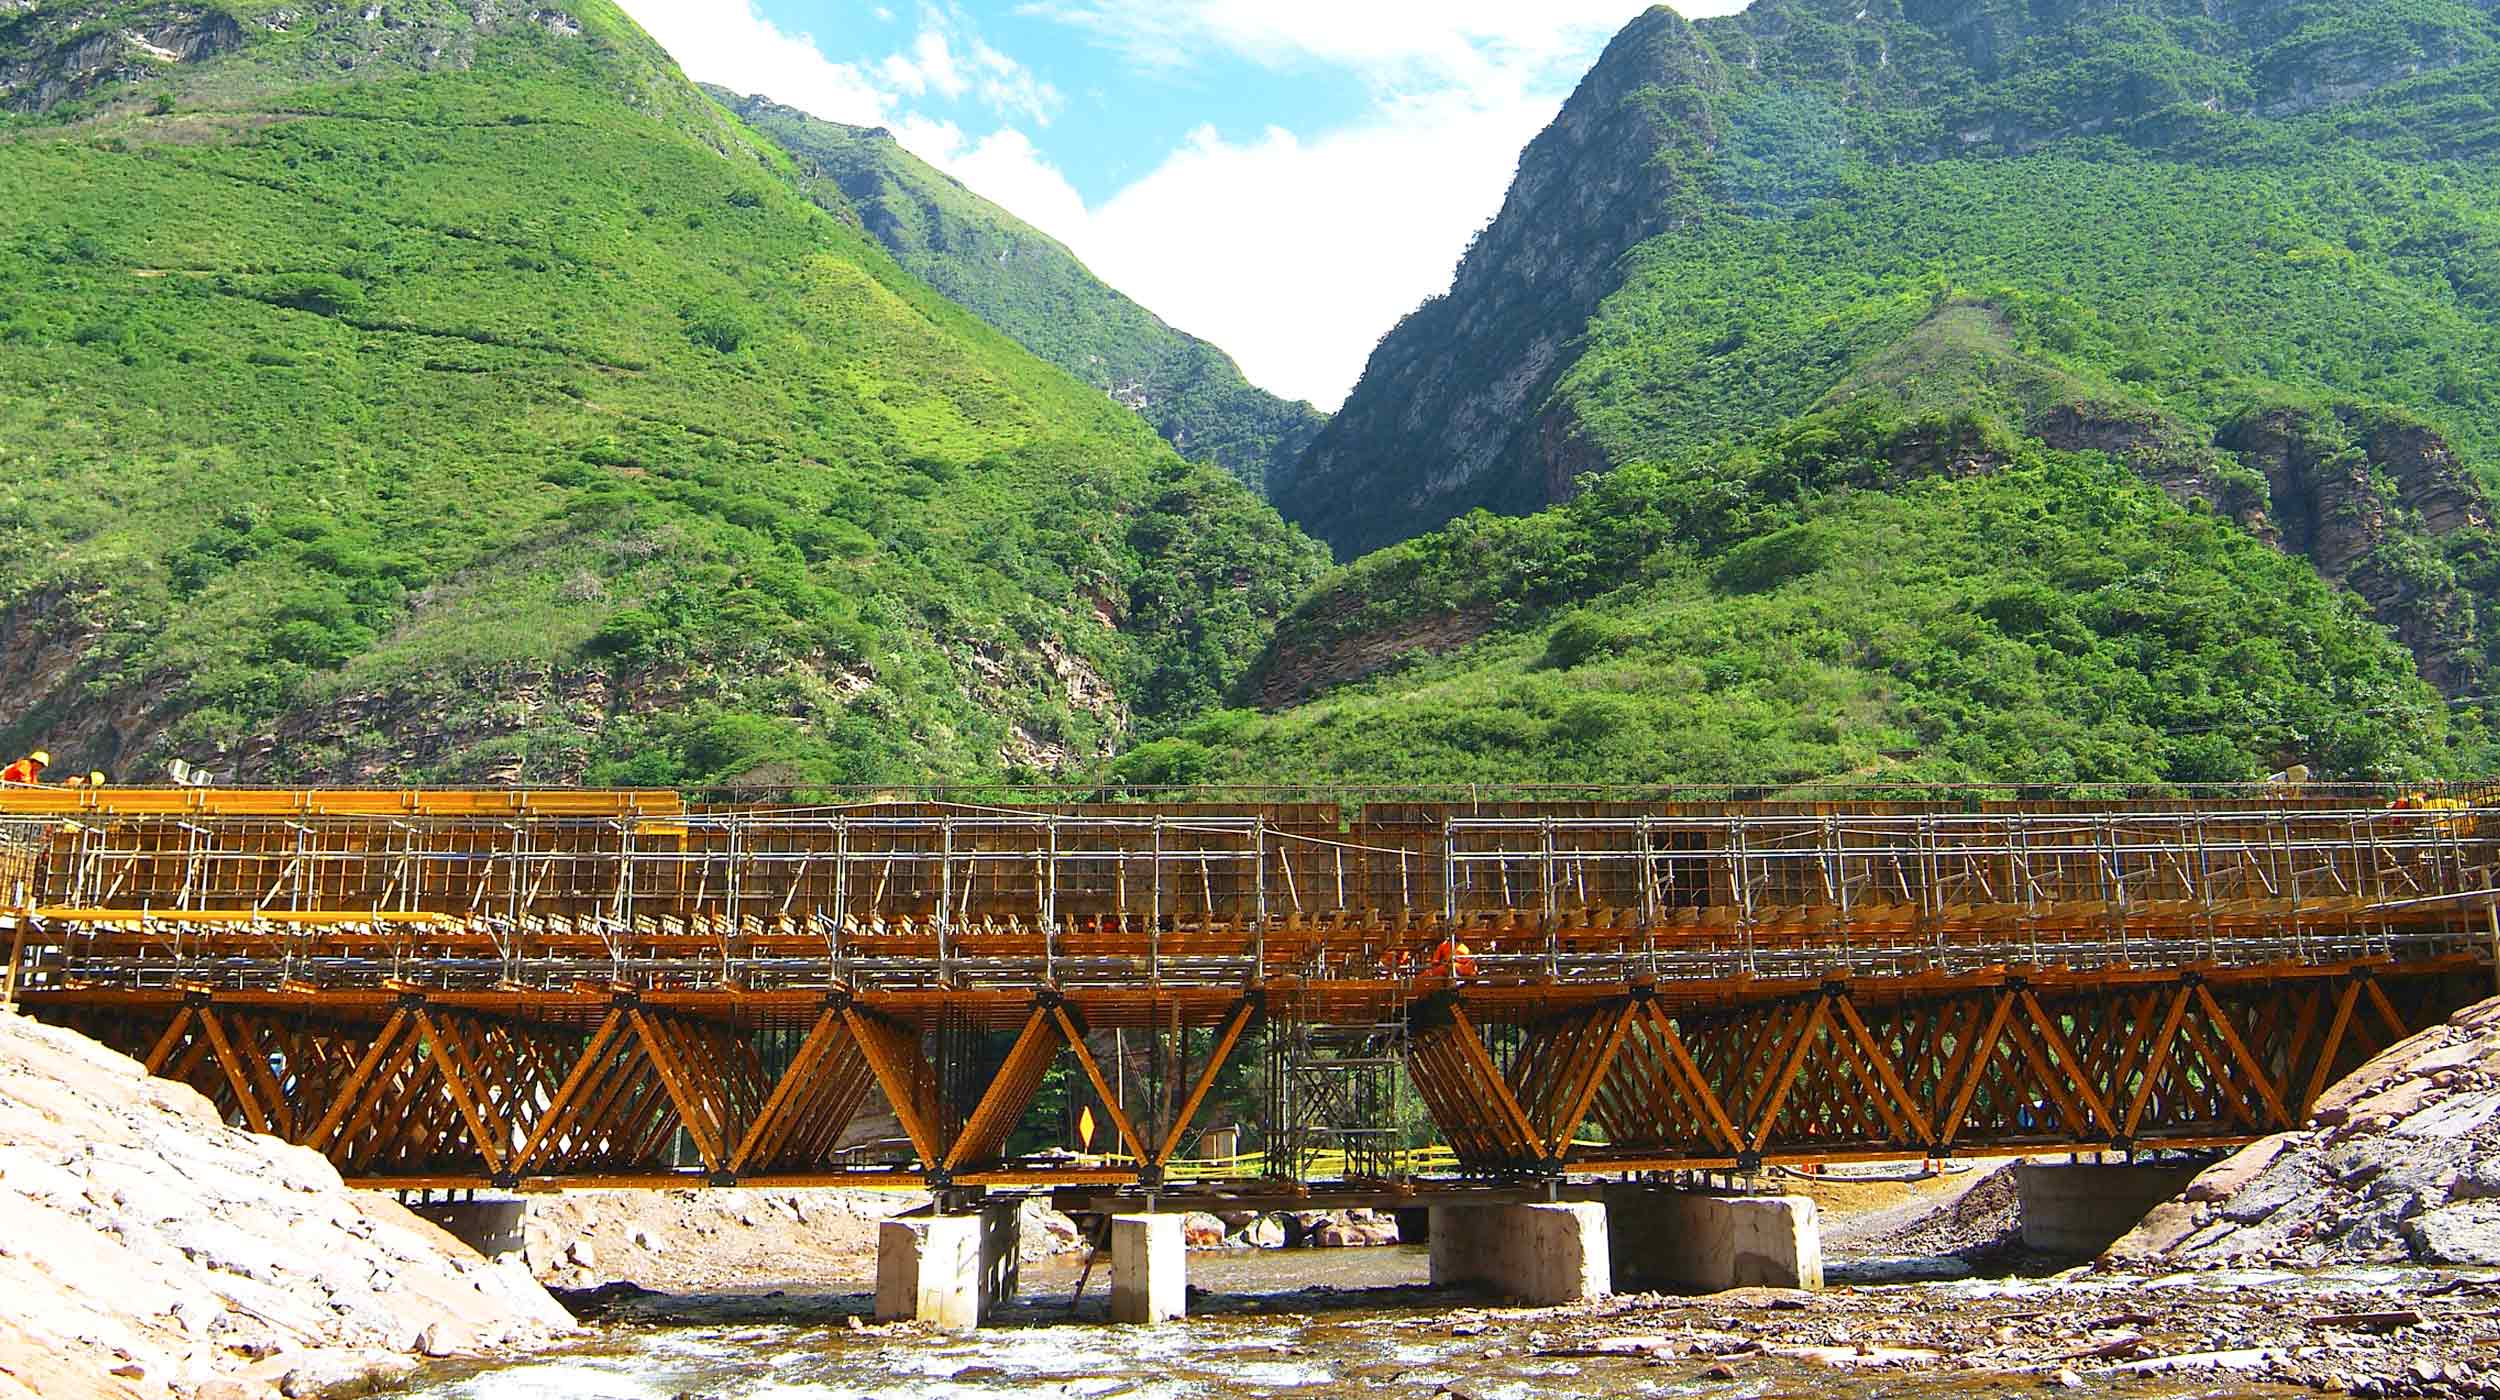 The 40 m long and 9.4 m wide Tingo Bridge is located in the Amazonian province of Bagua Grande, on the 900 km long Northern Interoceanic Highway.